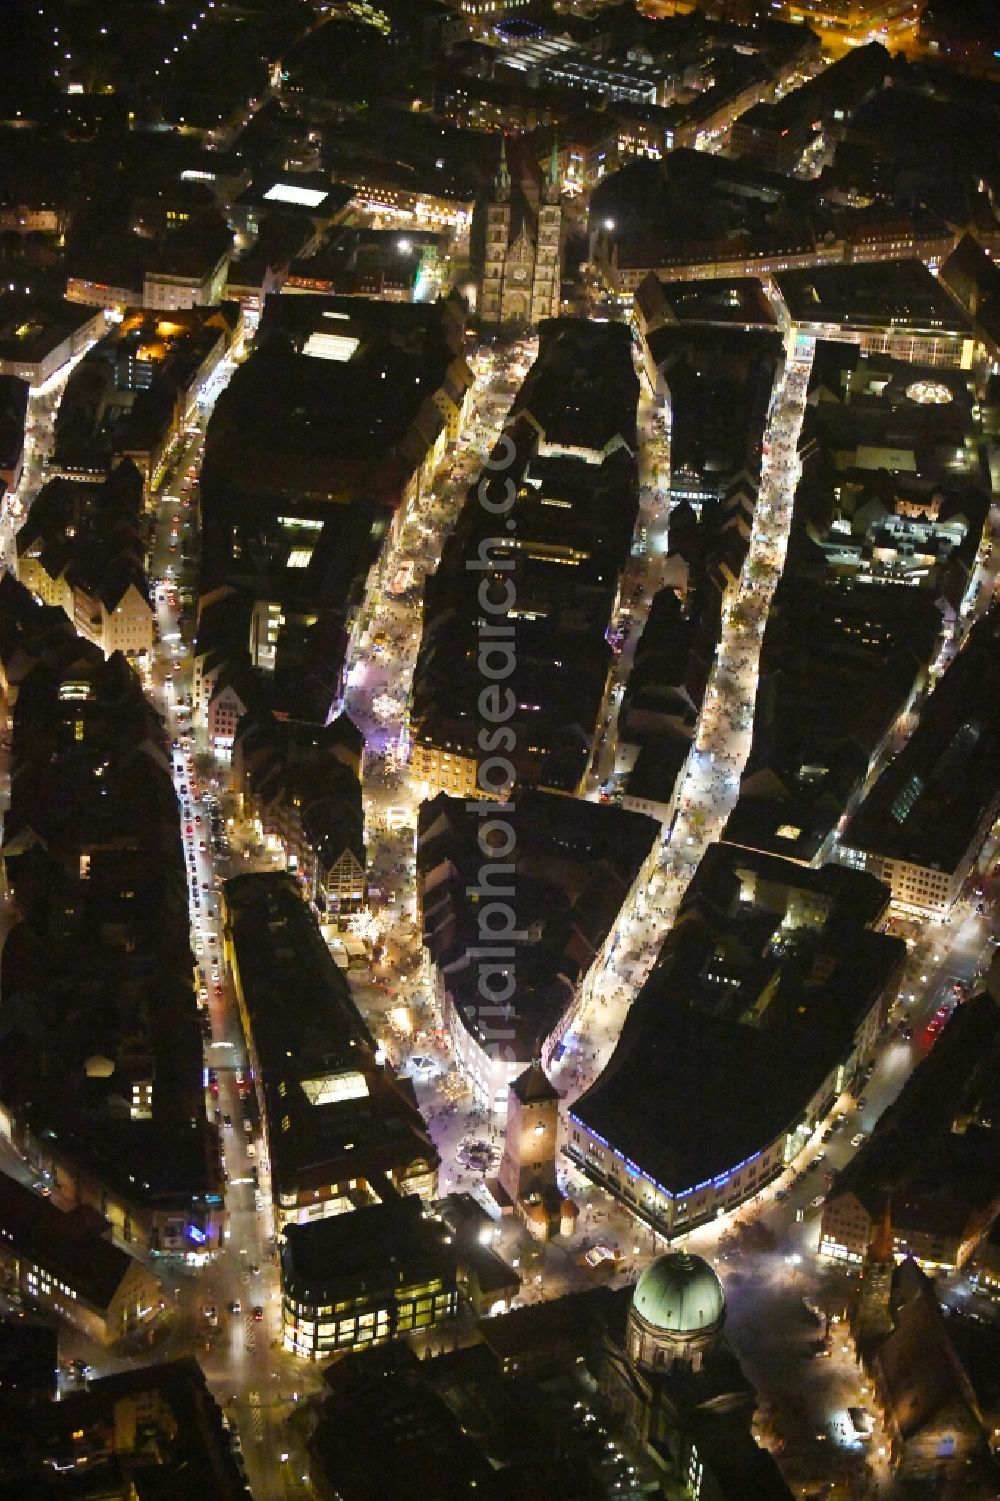 Aerial image at night Nürnberg - Night lighting Church building in St. Elisabethkirche and St. Jakob on place Jakobsplatz in Old Town- center of downtown in the district Altstadt - Sankt Lorenz in Nuremberg in the state Bavaria, Germany